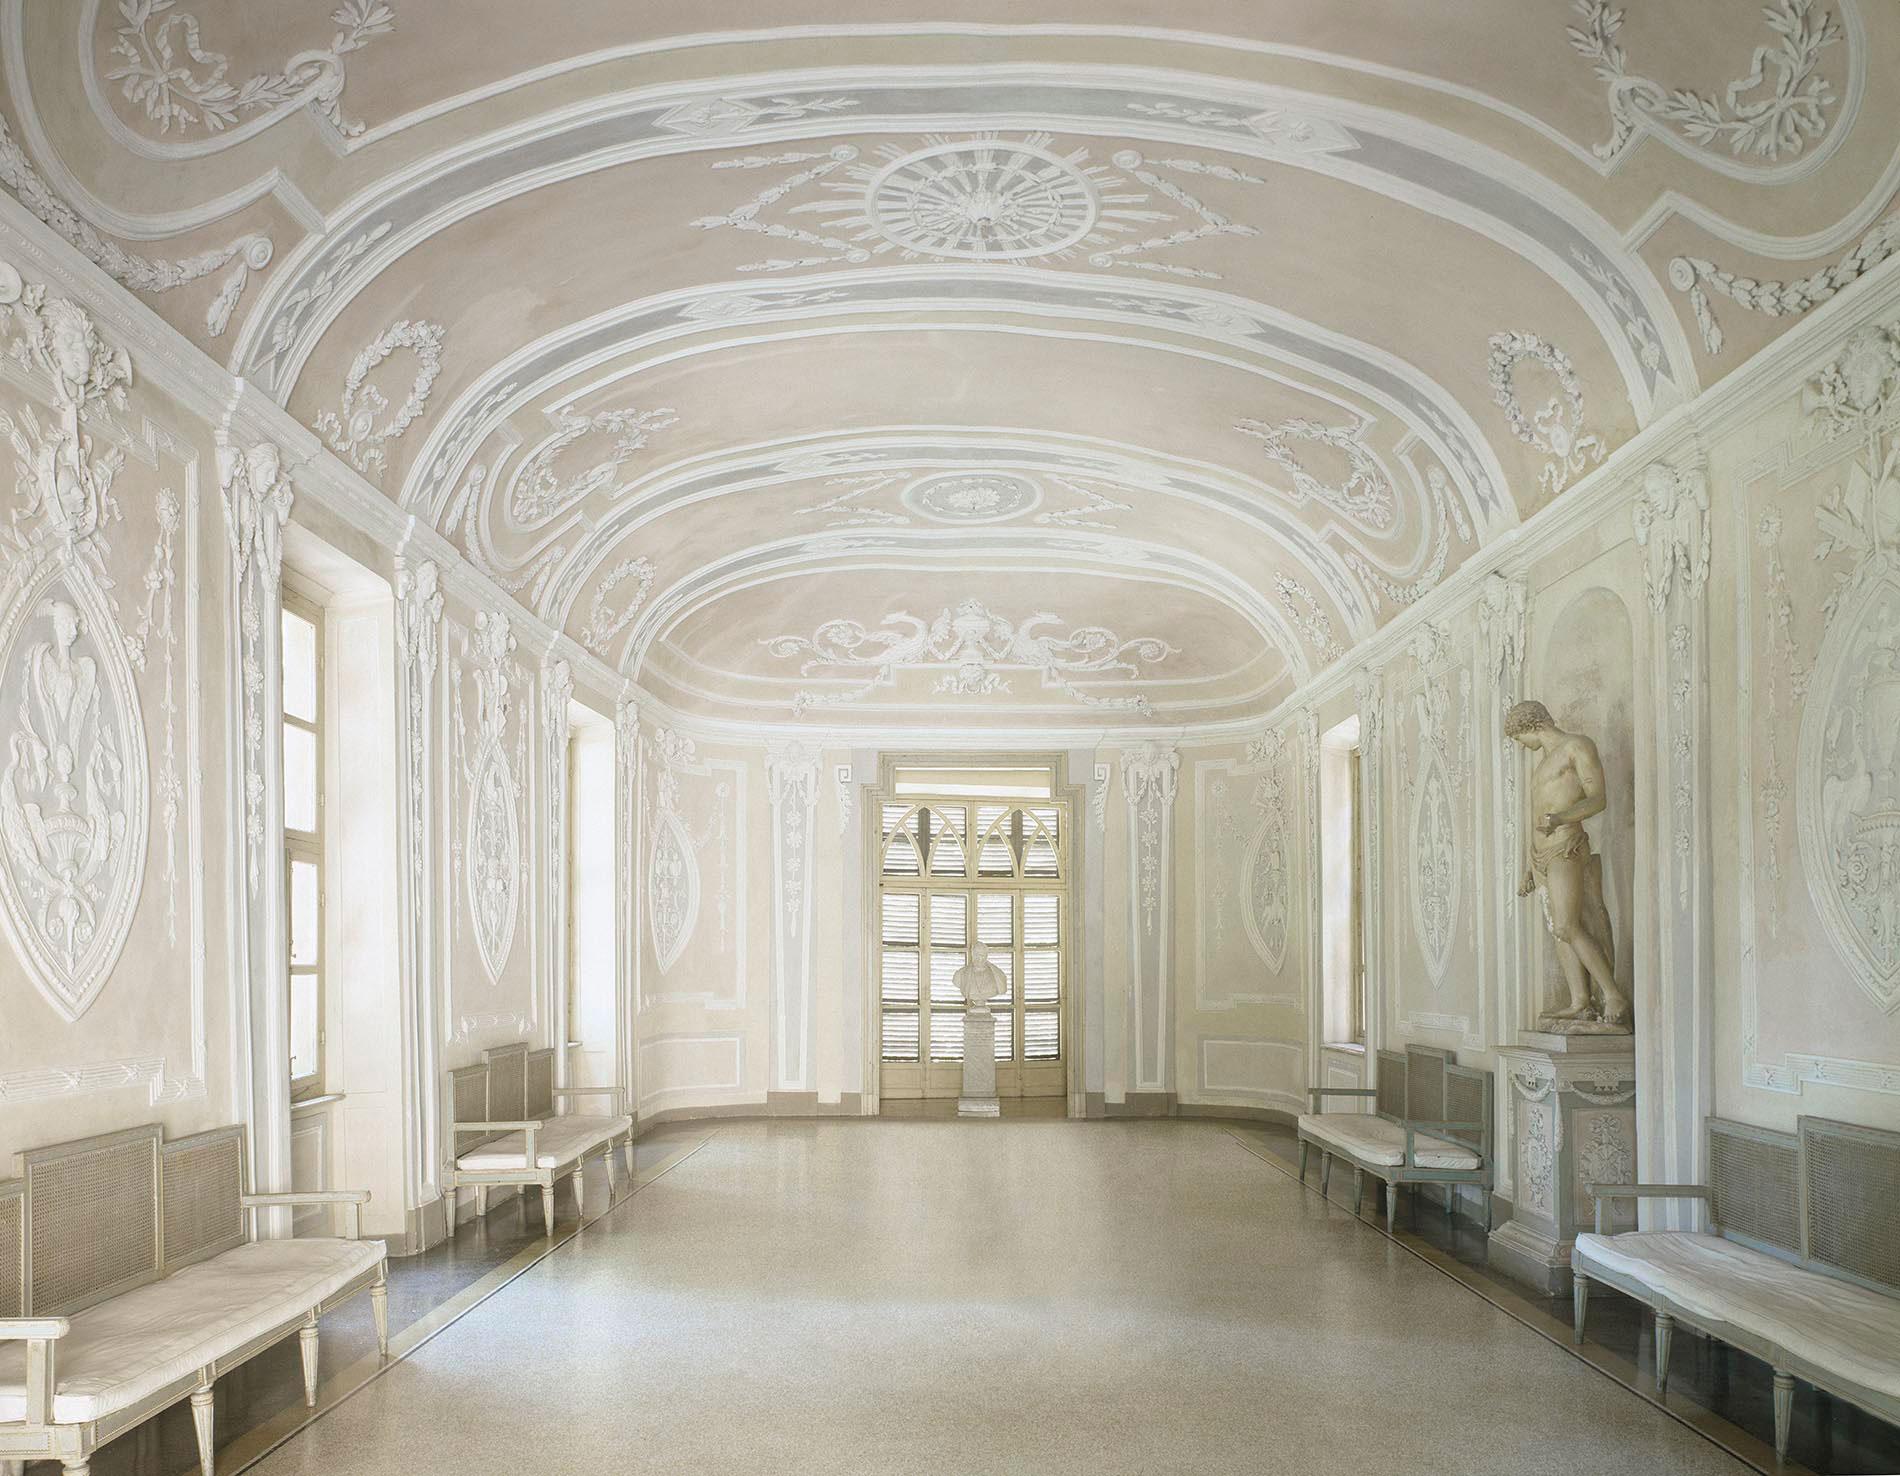 Torino II, 2005
Chromogenic Print mounted on aluminum
Signed, dated, and numbered on verso
39.5 x 47.5"/ 100 x 120 cm Edition of 5
47.5 x 59"  / 120 x 150 cm Edition of 5
88.5 x 71" / 180 x 225 cm Edition of 5

"What makes his work unique is how he